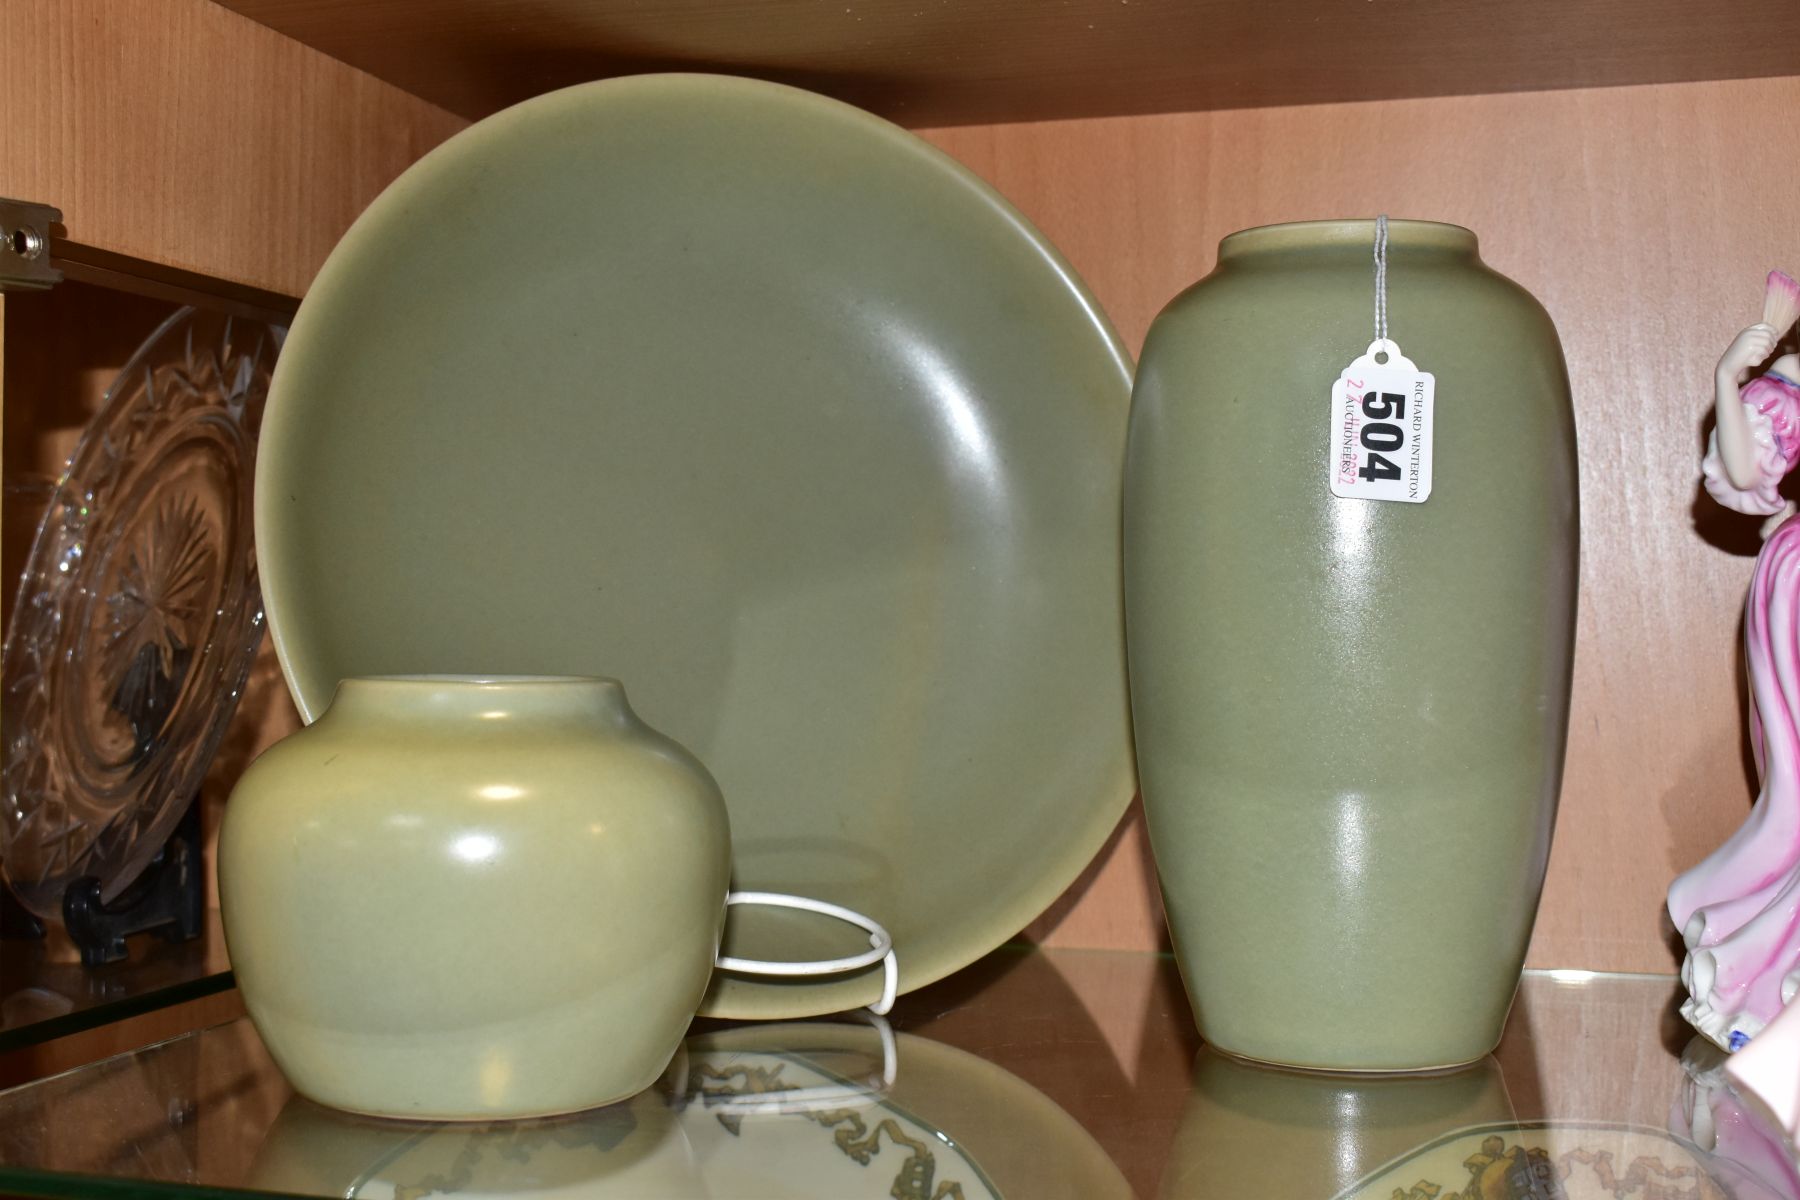 THREE PIECES OF BULLER'S ART POTTERY, by Agnete Hoy, with mottled pale sage green glaze,